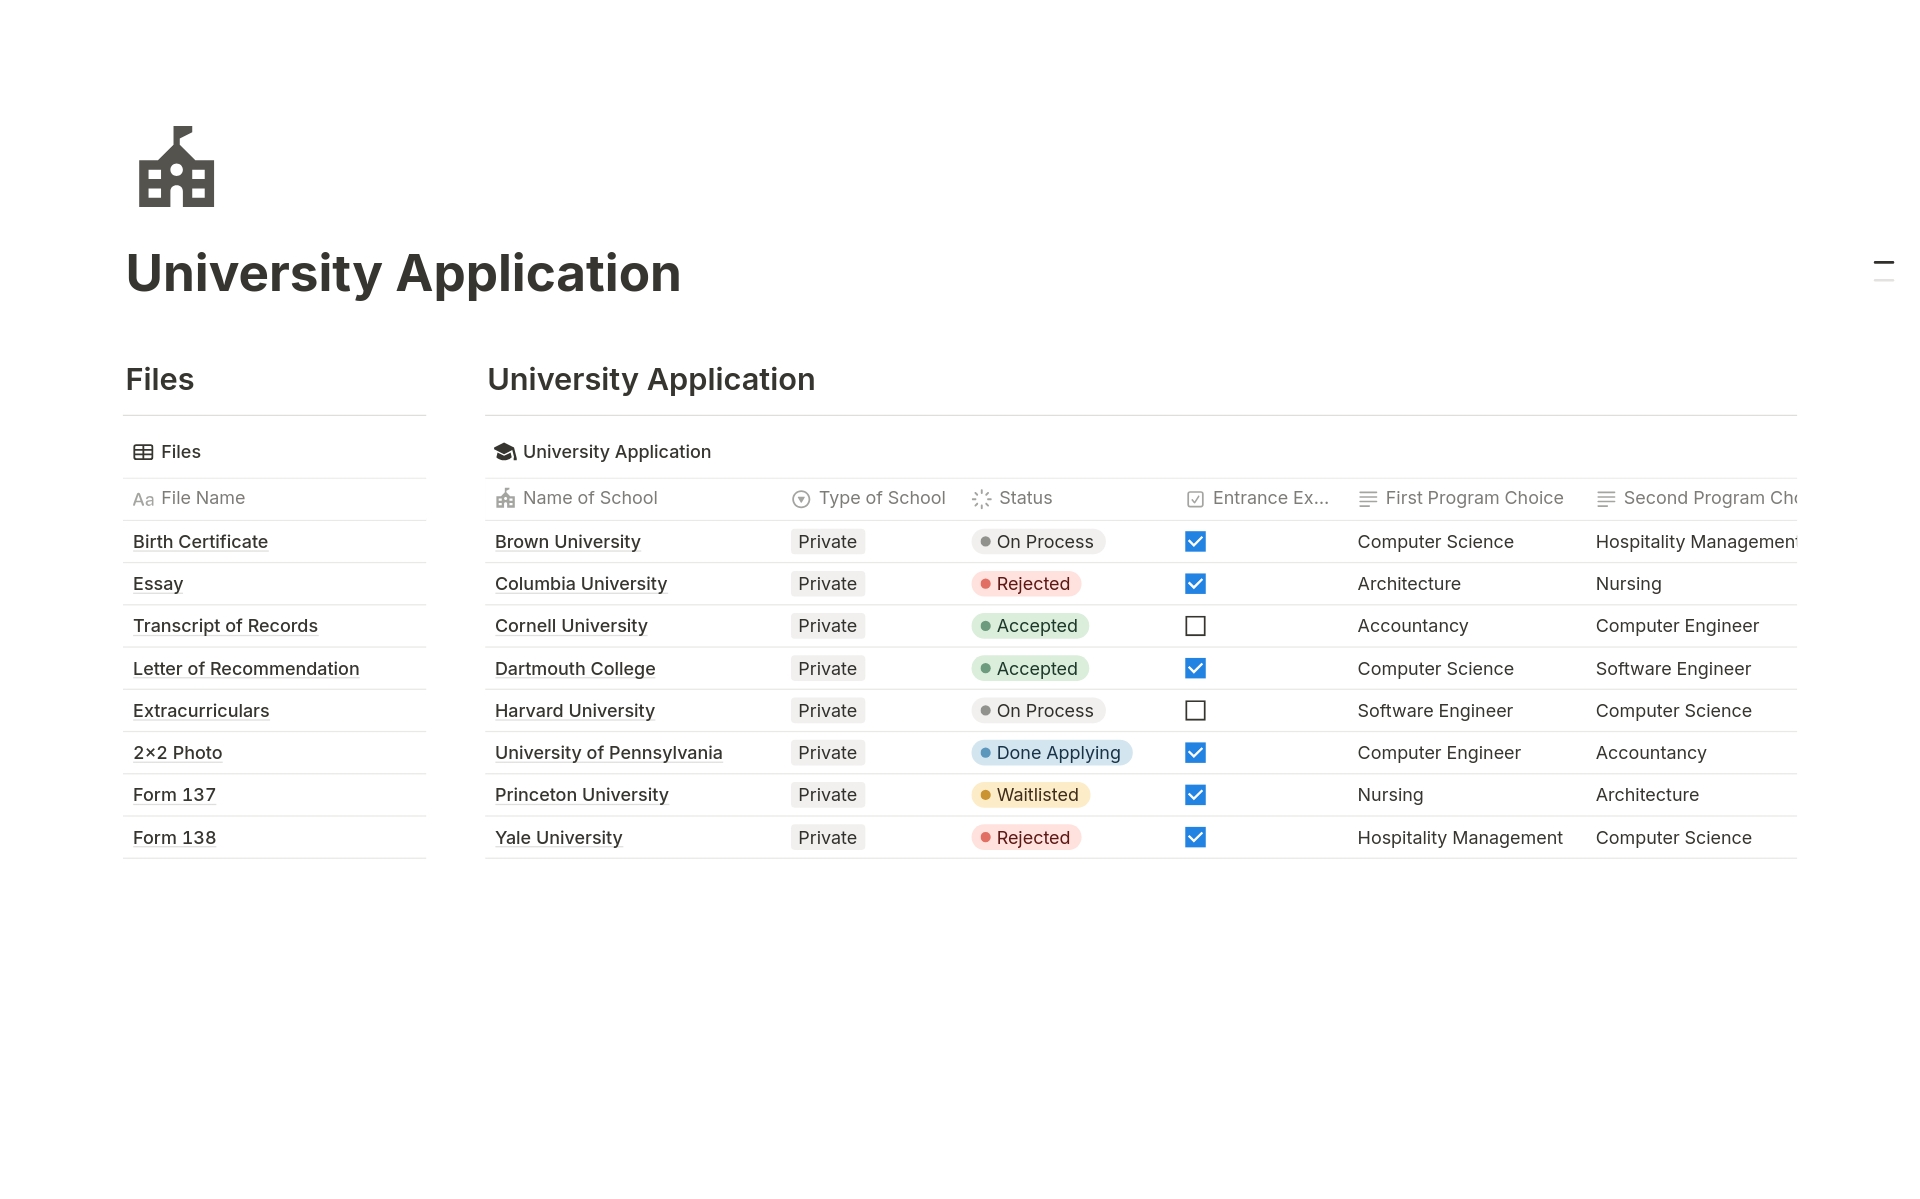 Simplify your university application process with this fun and efficient Notion template! Organize all your files, track applications by school type, status, entrance exams, and program choices. Say goodbye to clutter and hello to a hassle-free application experience!